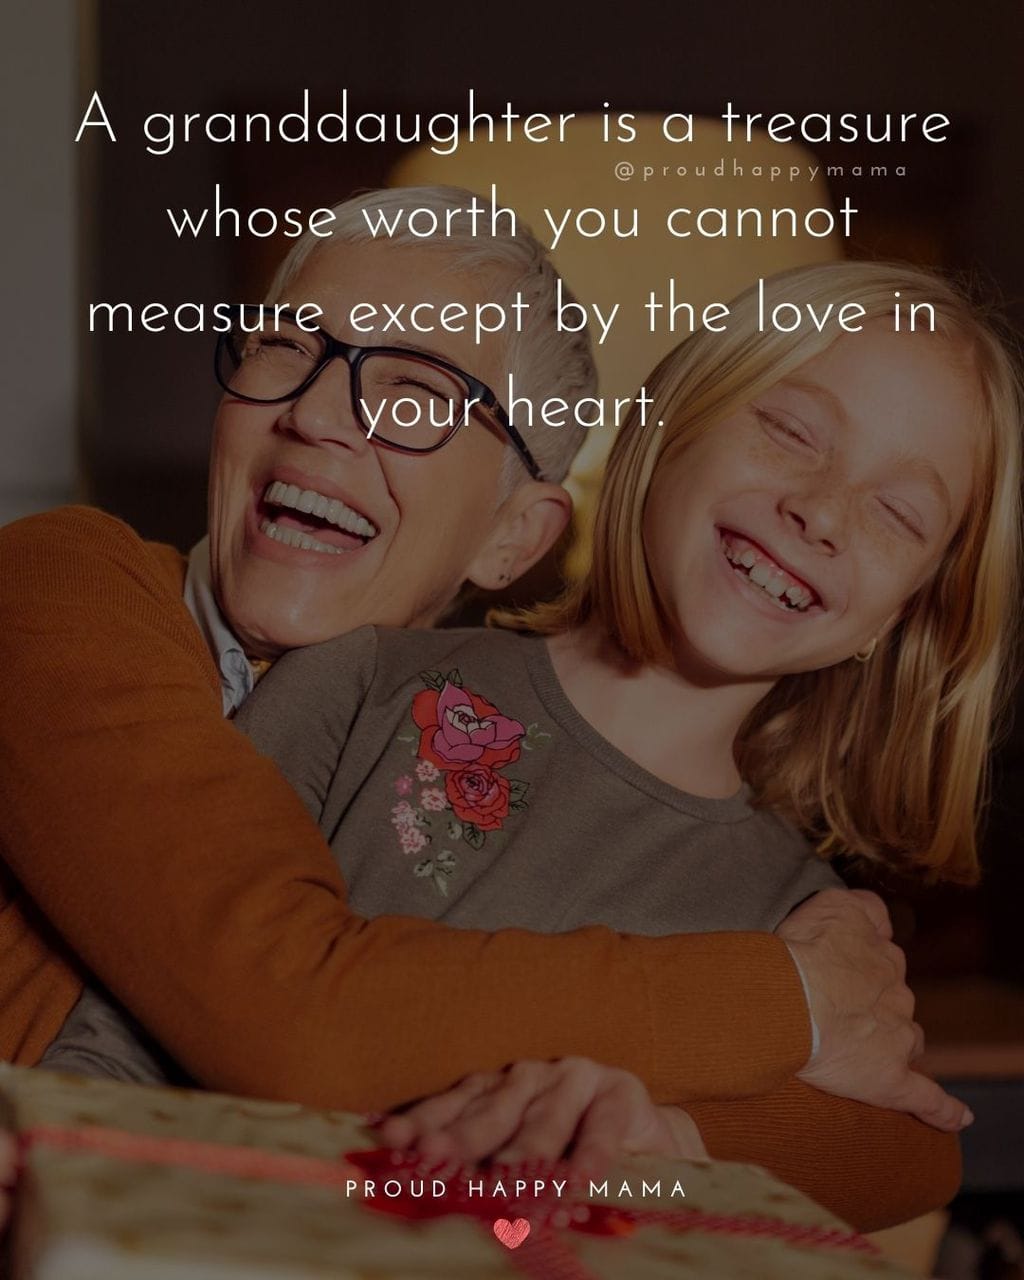 Granddaughter Quotes - A granddaughter is a treasure whose worth you cannot measure except by the love in your heart.